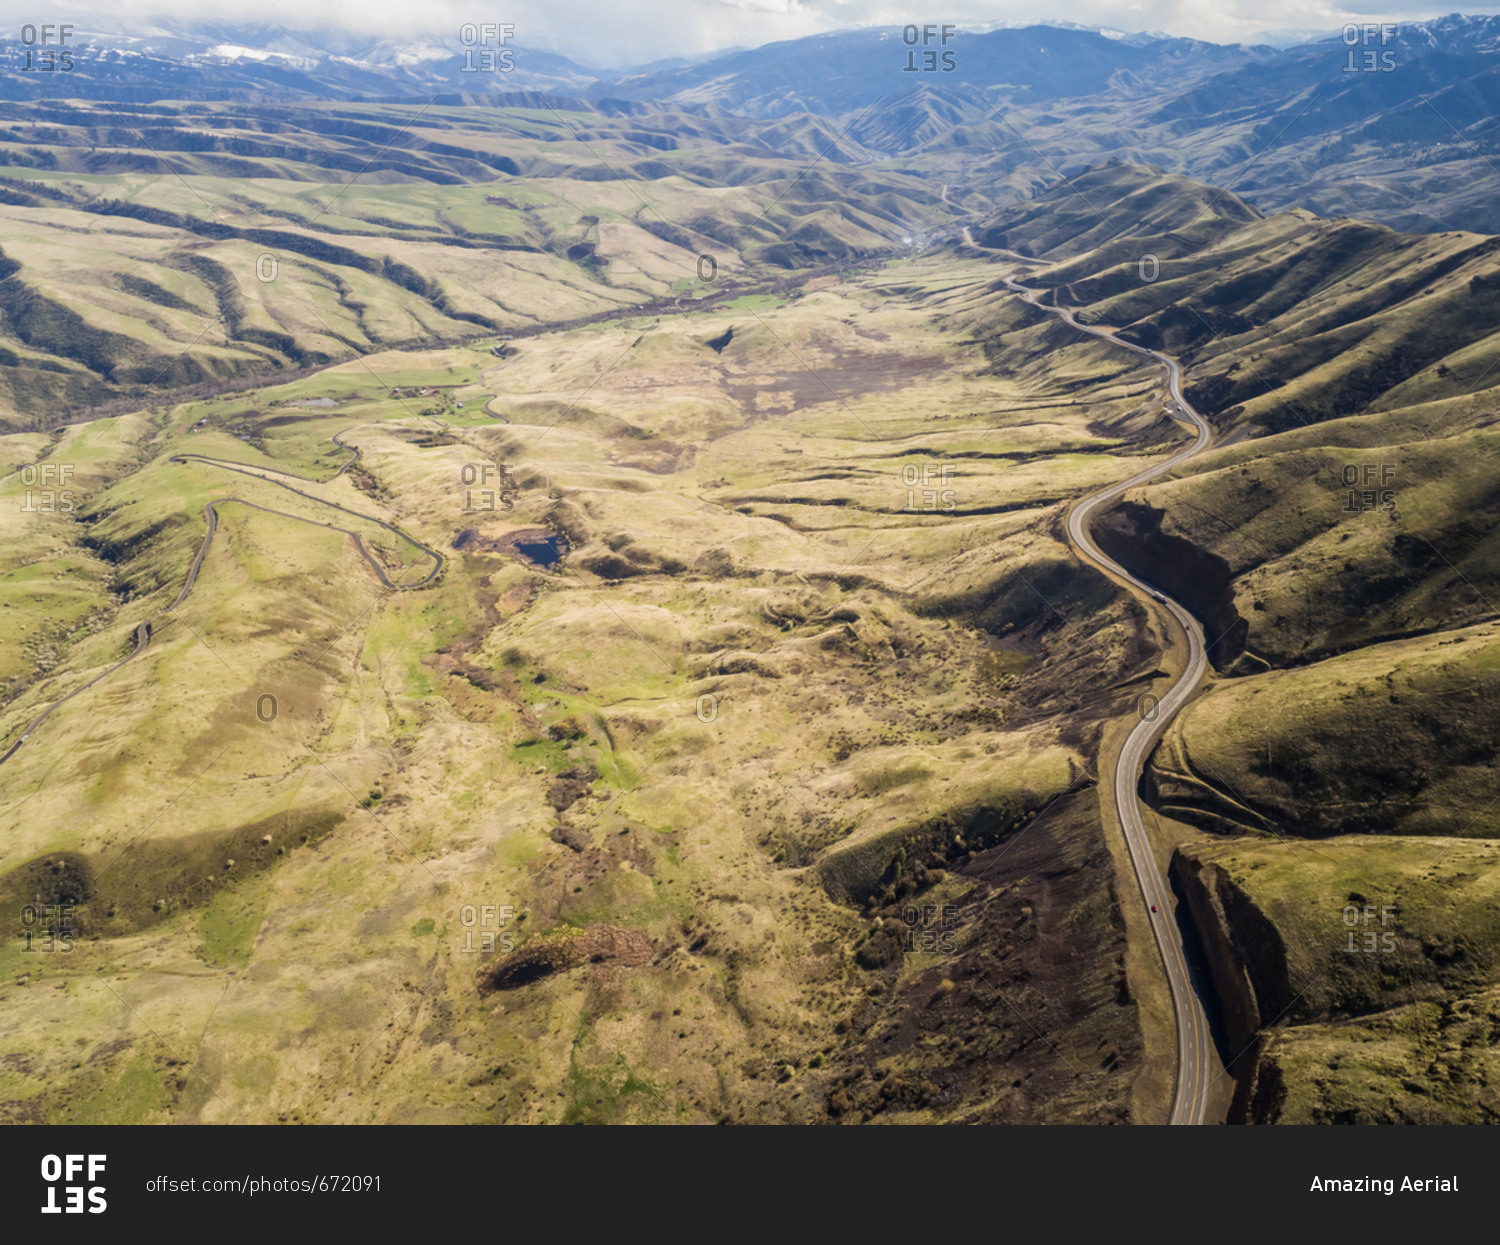 Aerial view of the Old HWY 95 road in White Bird Idaho, USA.